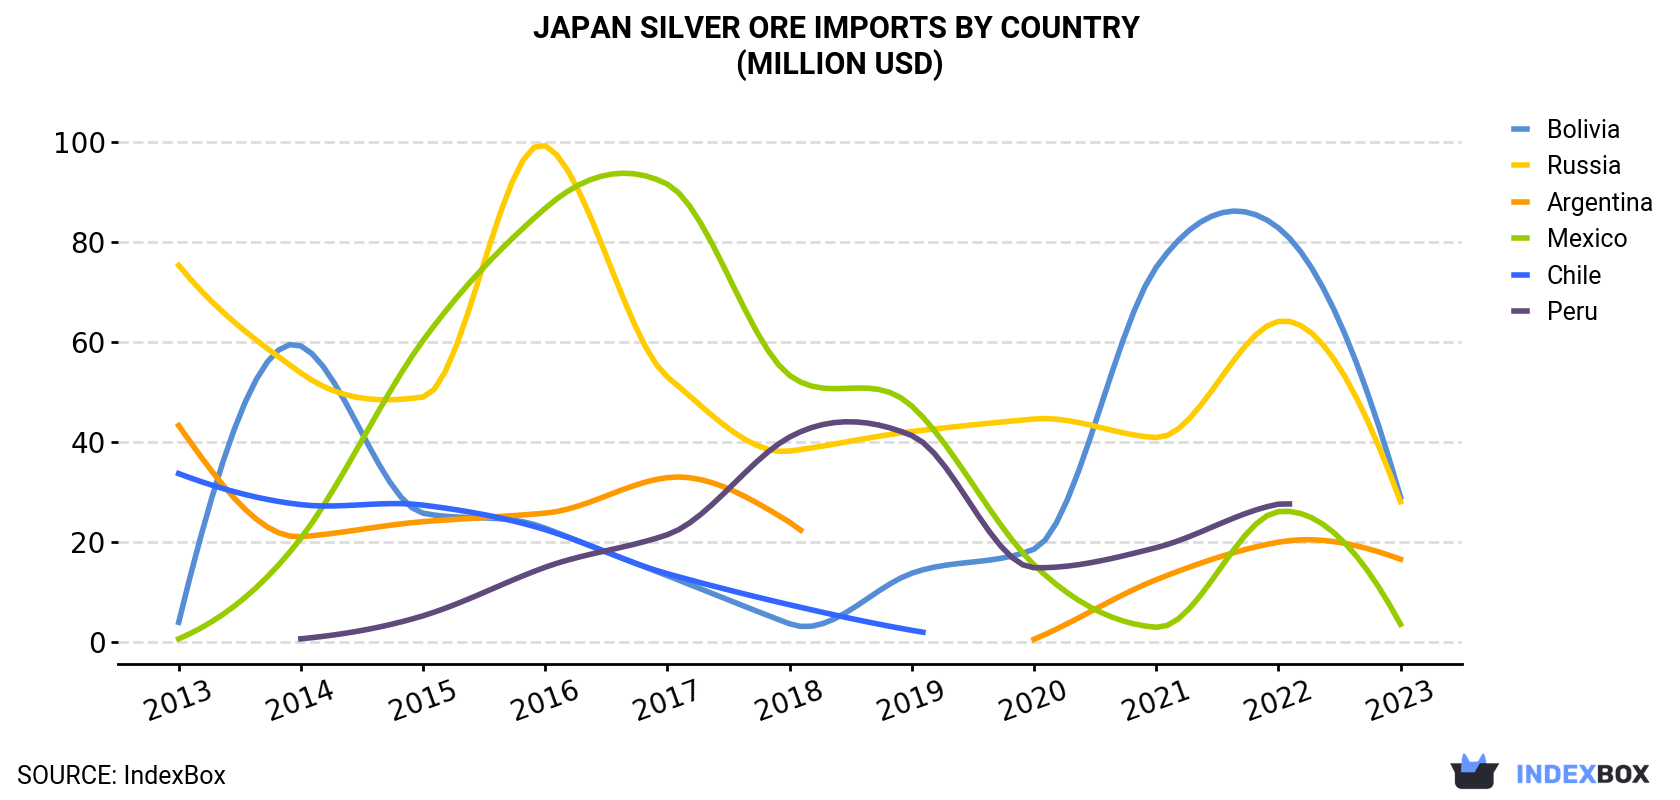 Japan Silver Ore Imports By Country (Million USD)